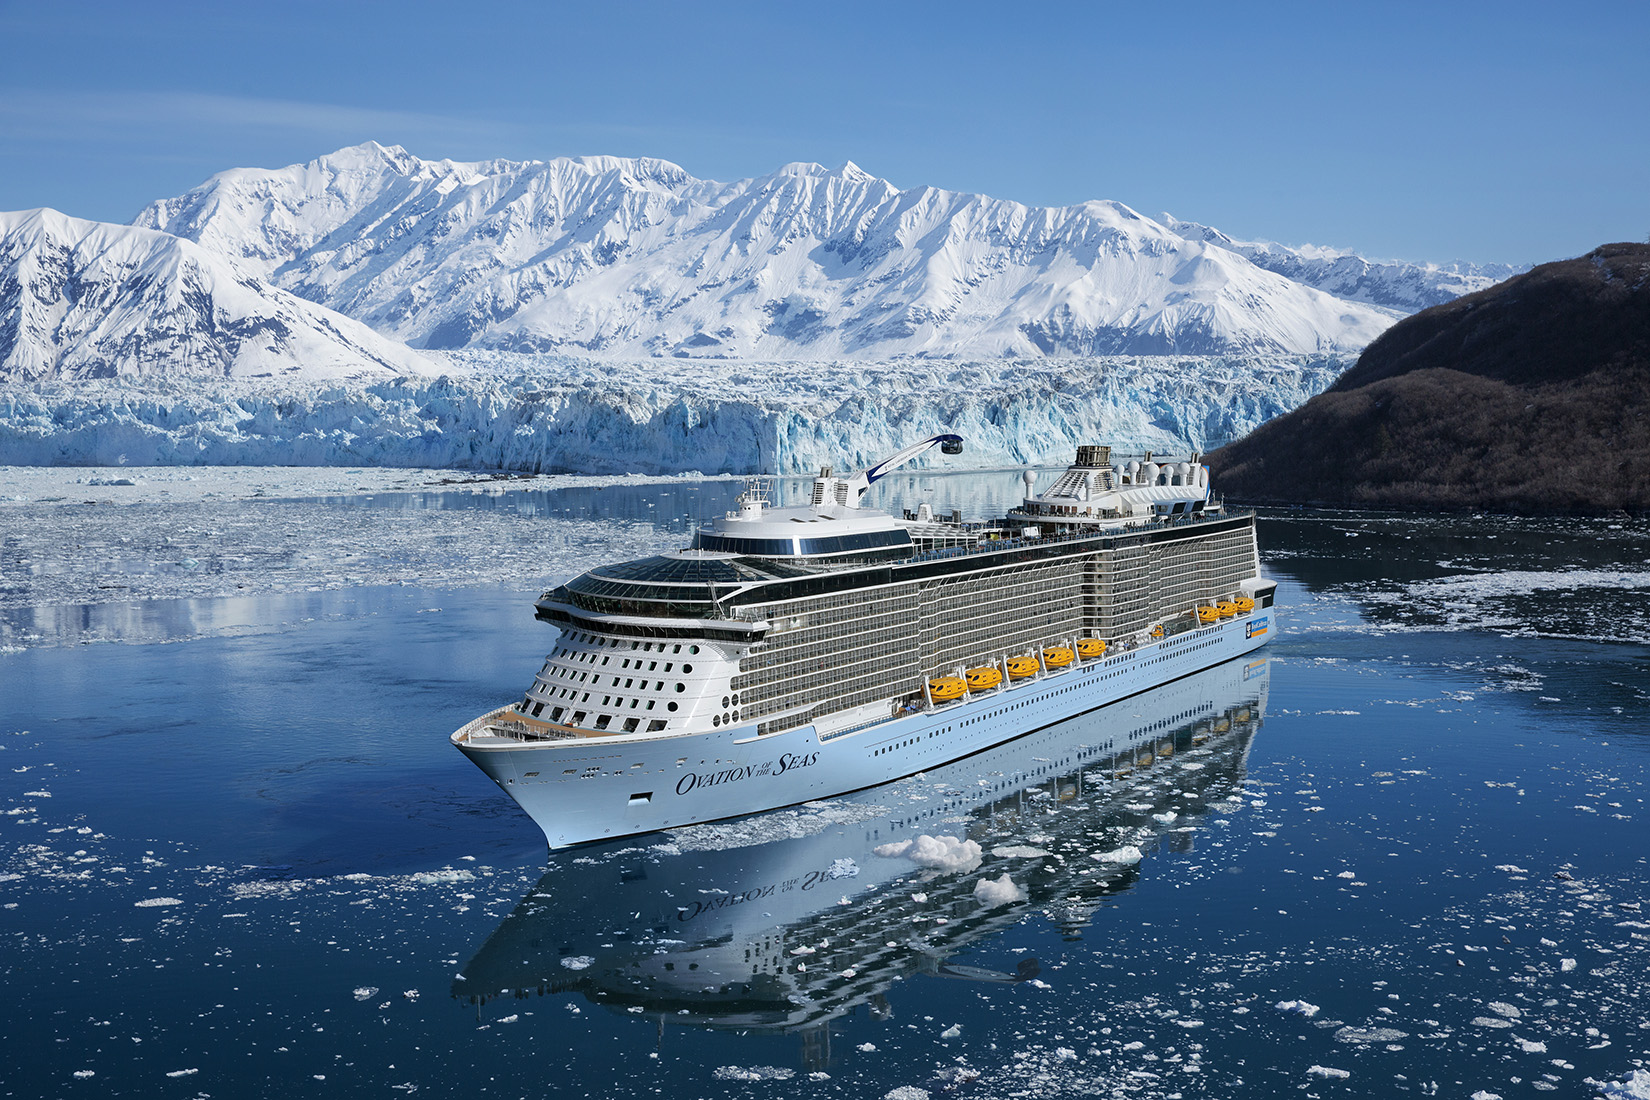 This Best Alaskan Cruise Ships For Families Most Searched for 2021